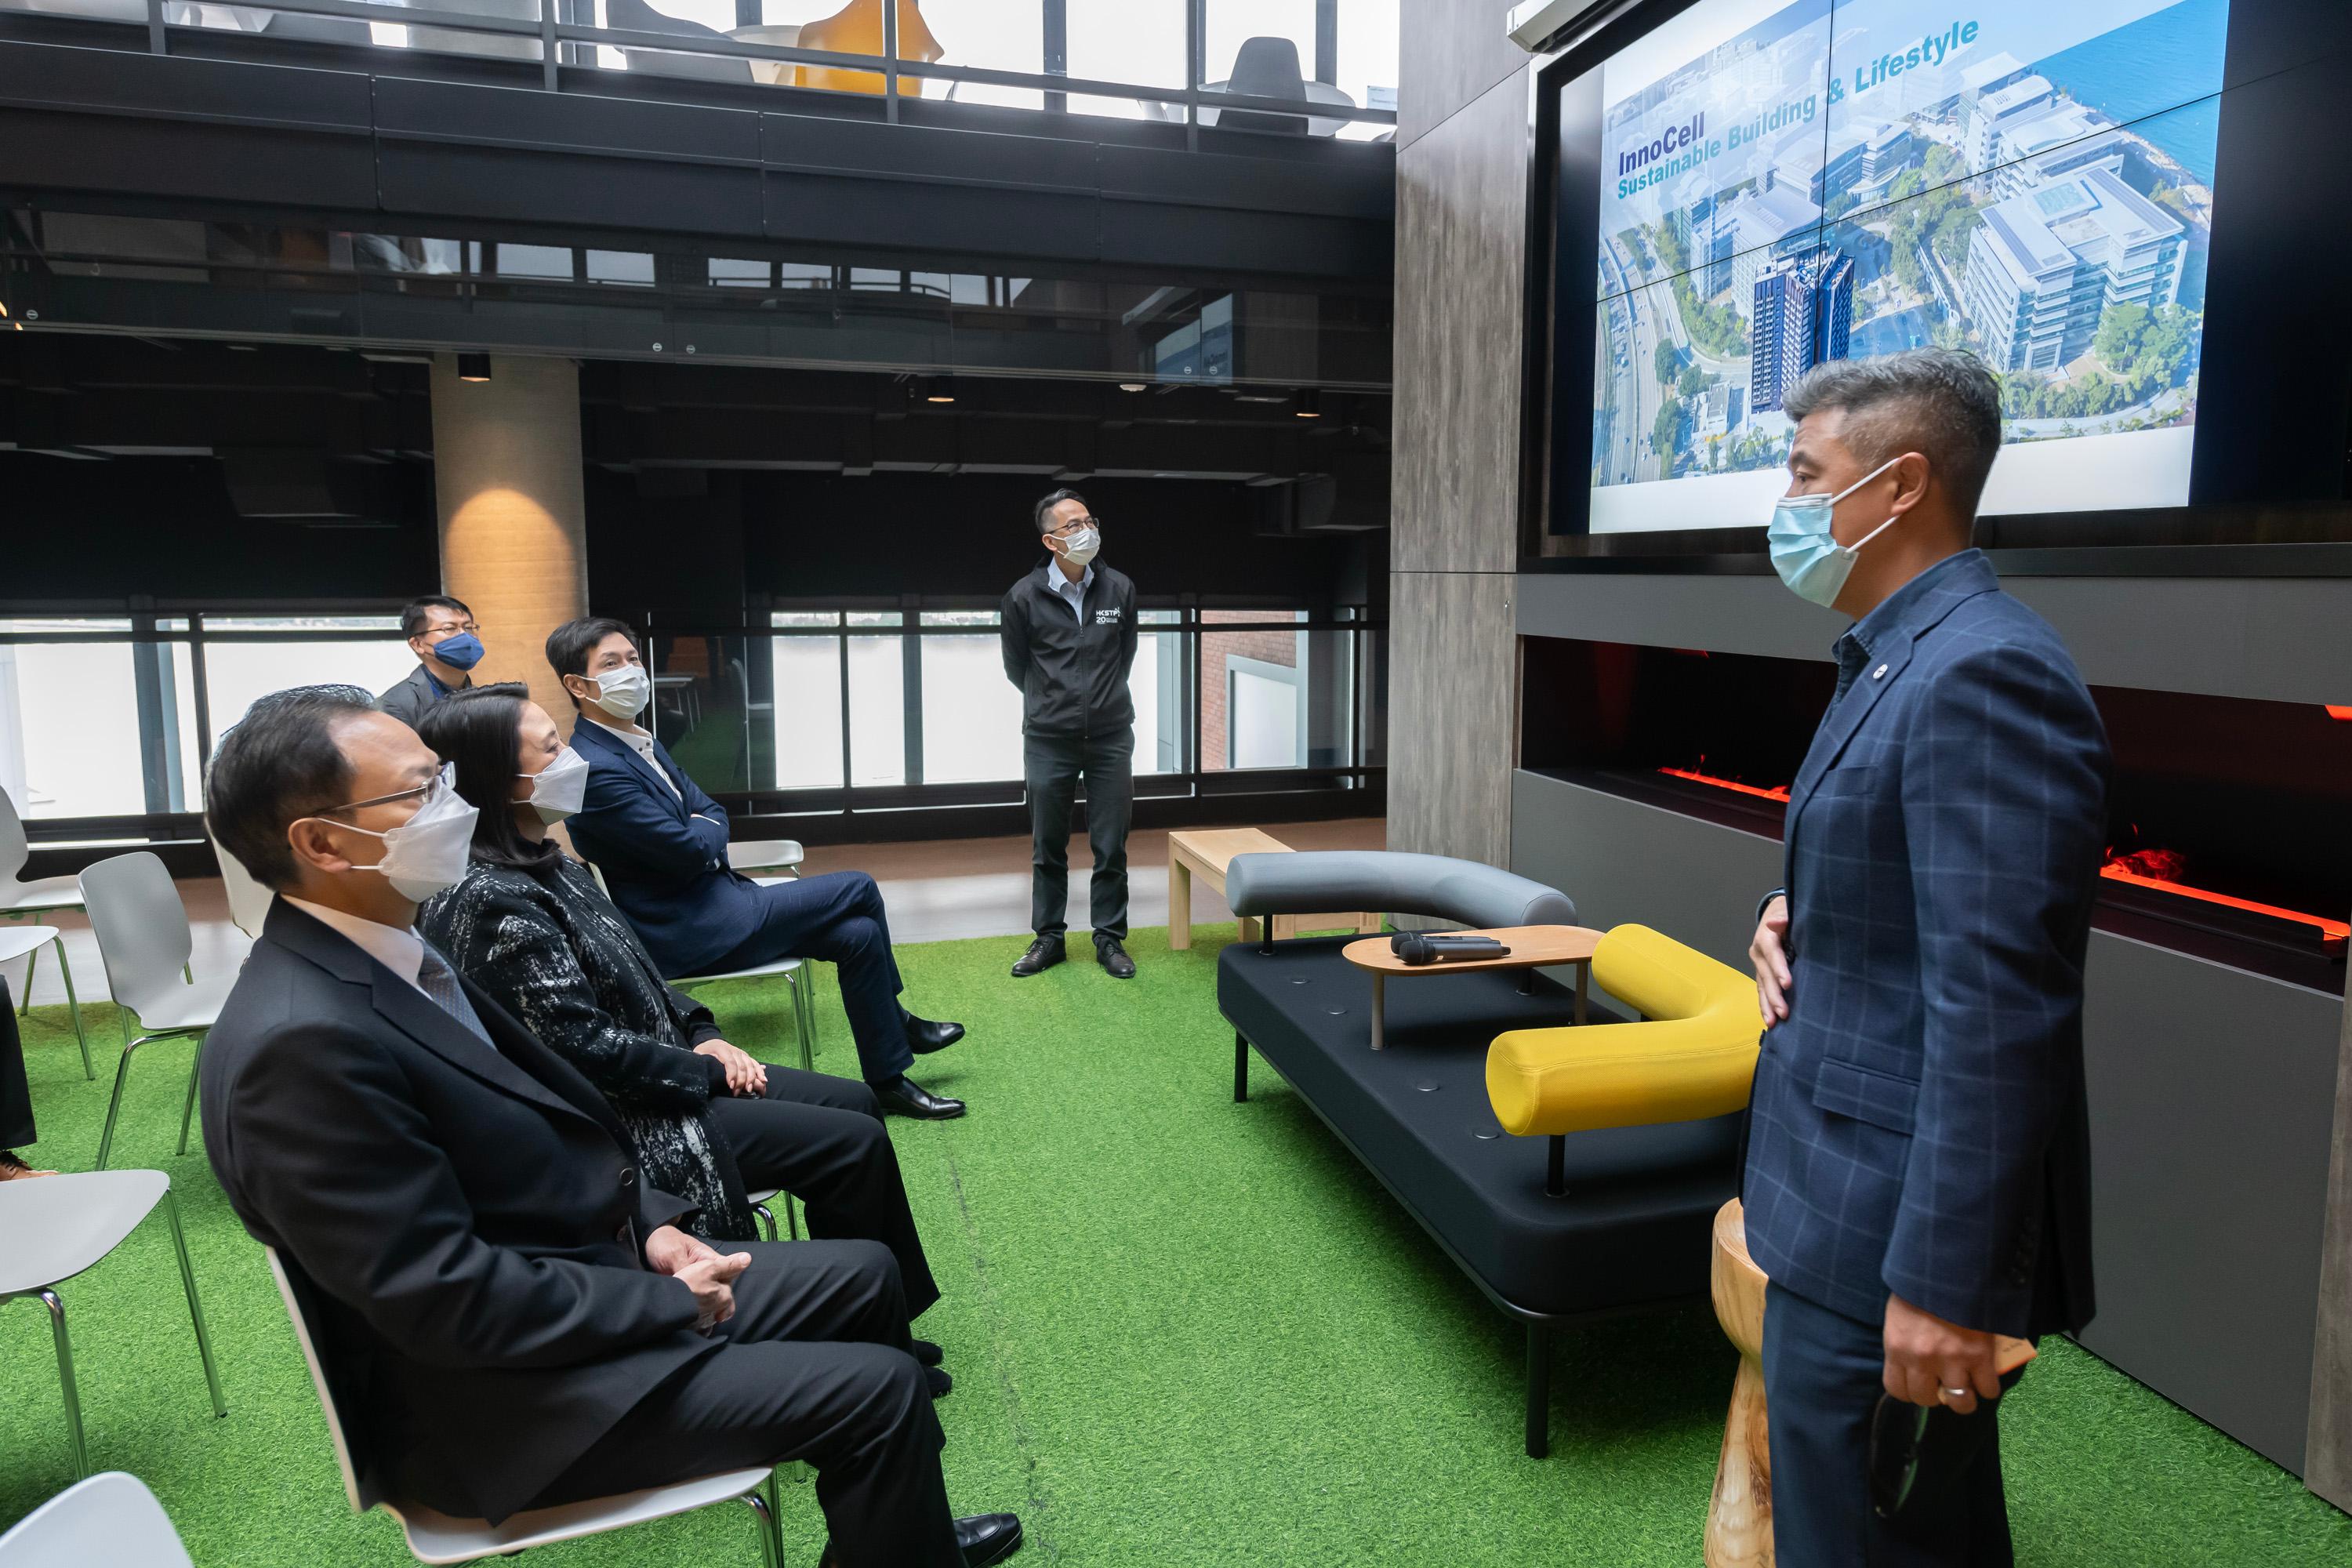 The Legislative Council Subcommittee on Matters Relating to the Development of Smart City visits smart environment facilities today (December 5). Photo shows the Subcommittee members visiting the InnoCell at the Hong Kong Science Park to understand its construction technology and green features.